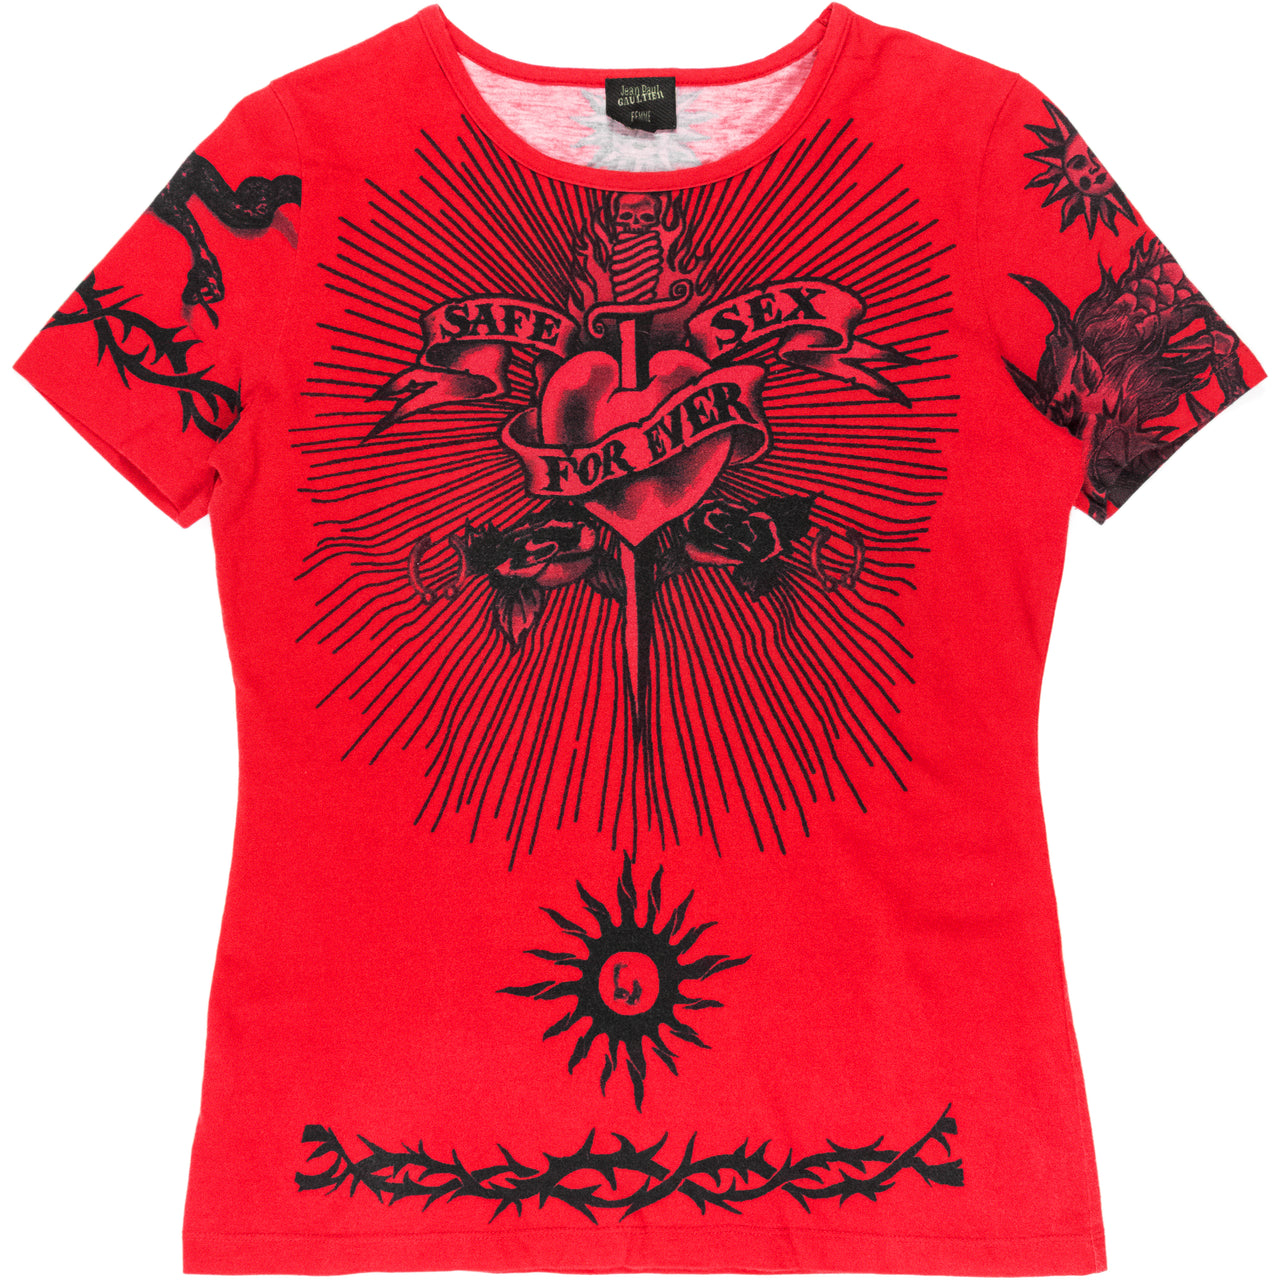 Jean Paul Gaultier Red "Safe Sex Forever" Tee - SS96